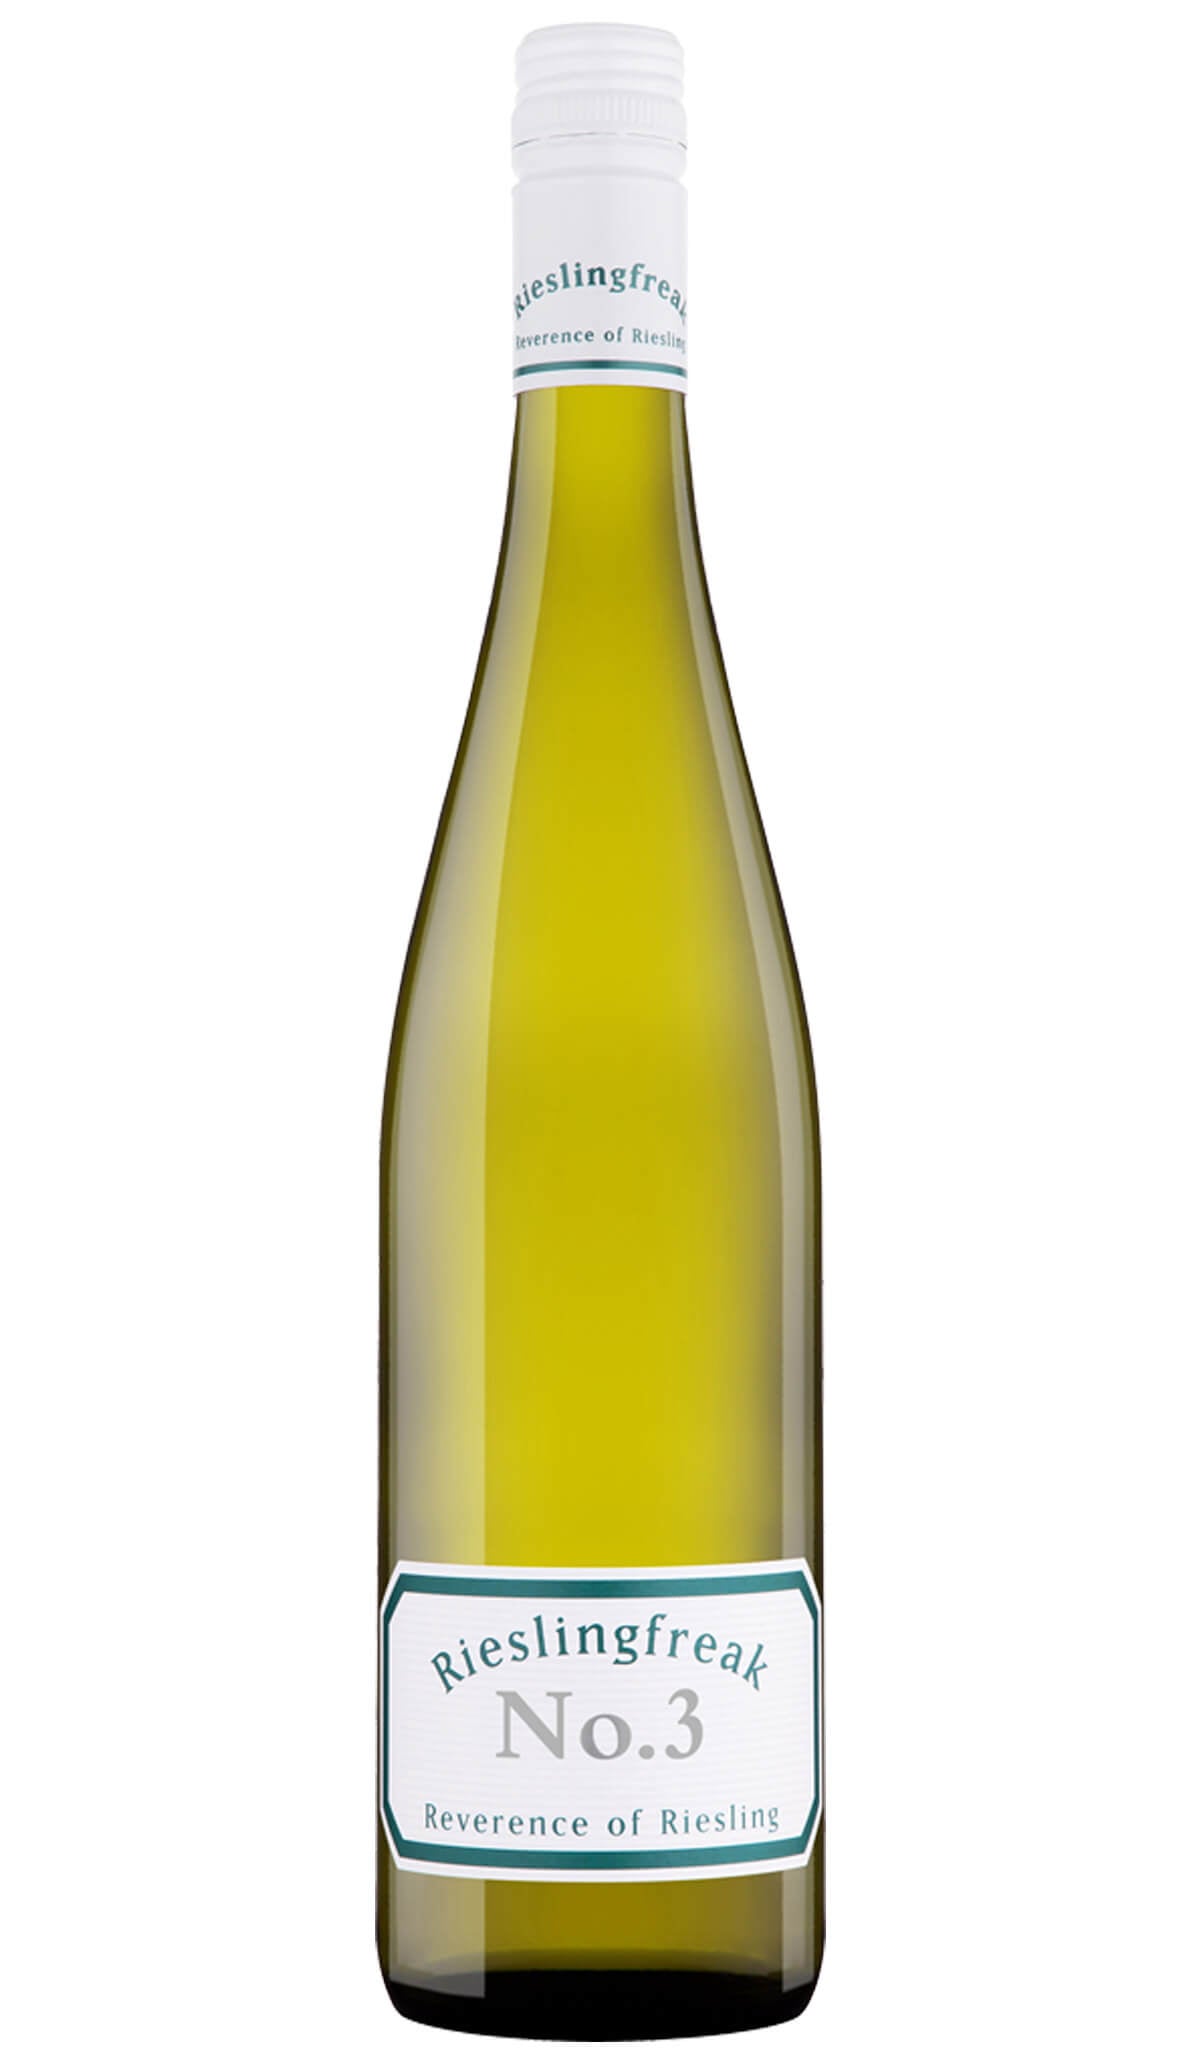 Find out more or buy Rieslingfreak No.3 Clare Valley Riesling 2023 online at Wine Sellers Direct - Australia’s independent liquor specialists.